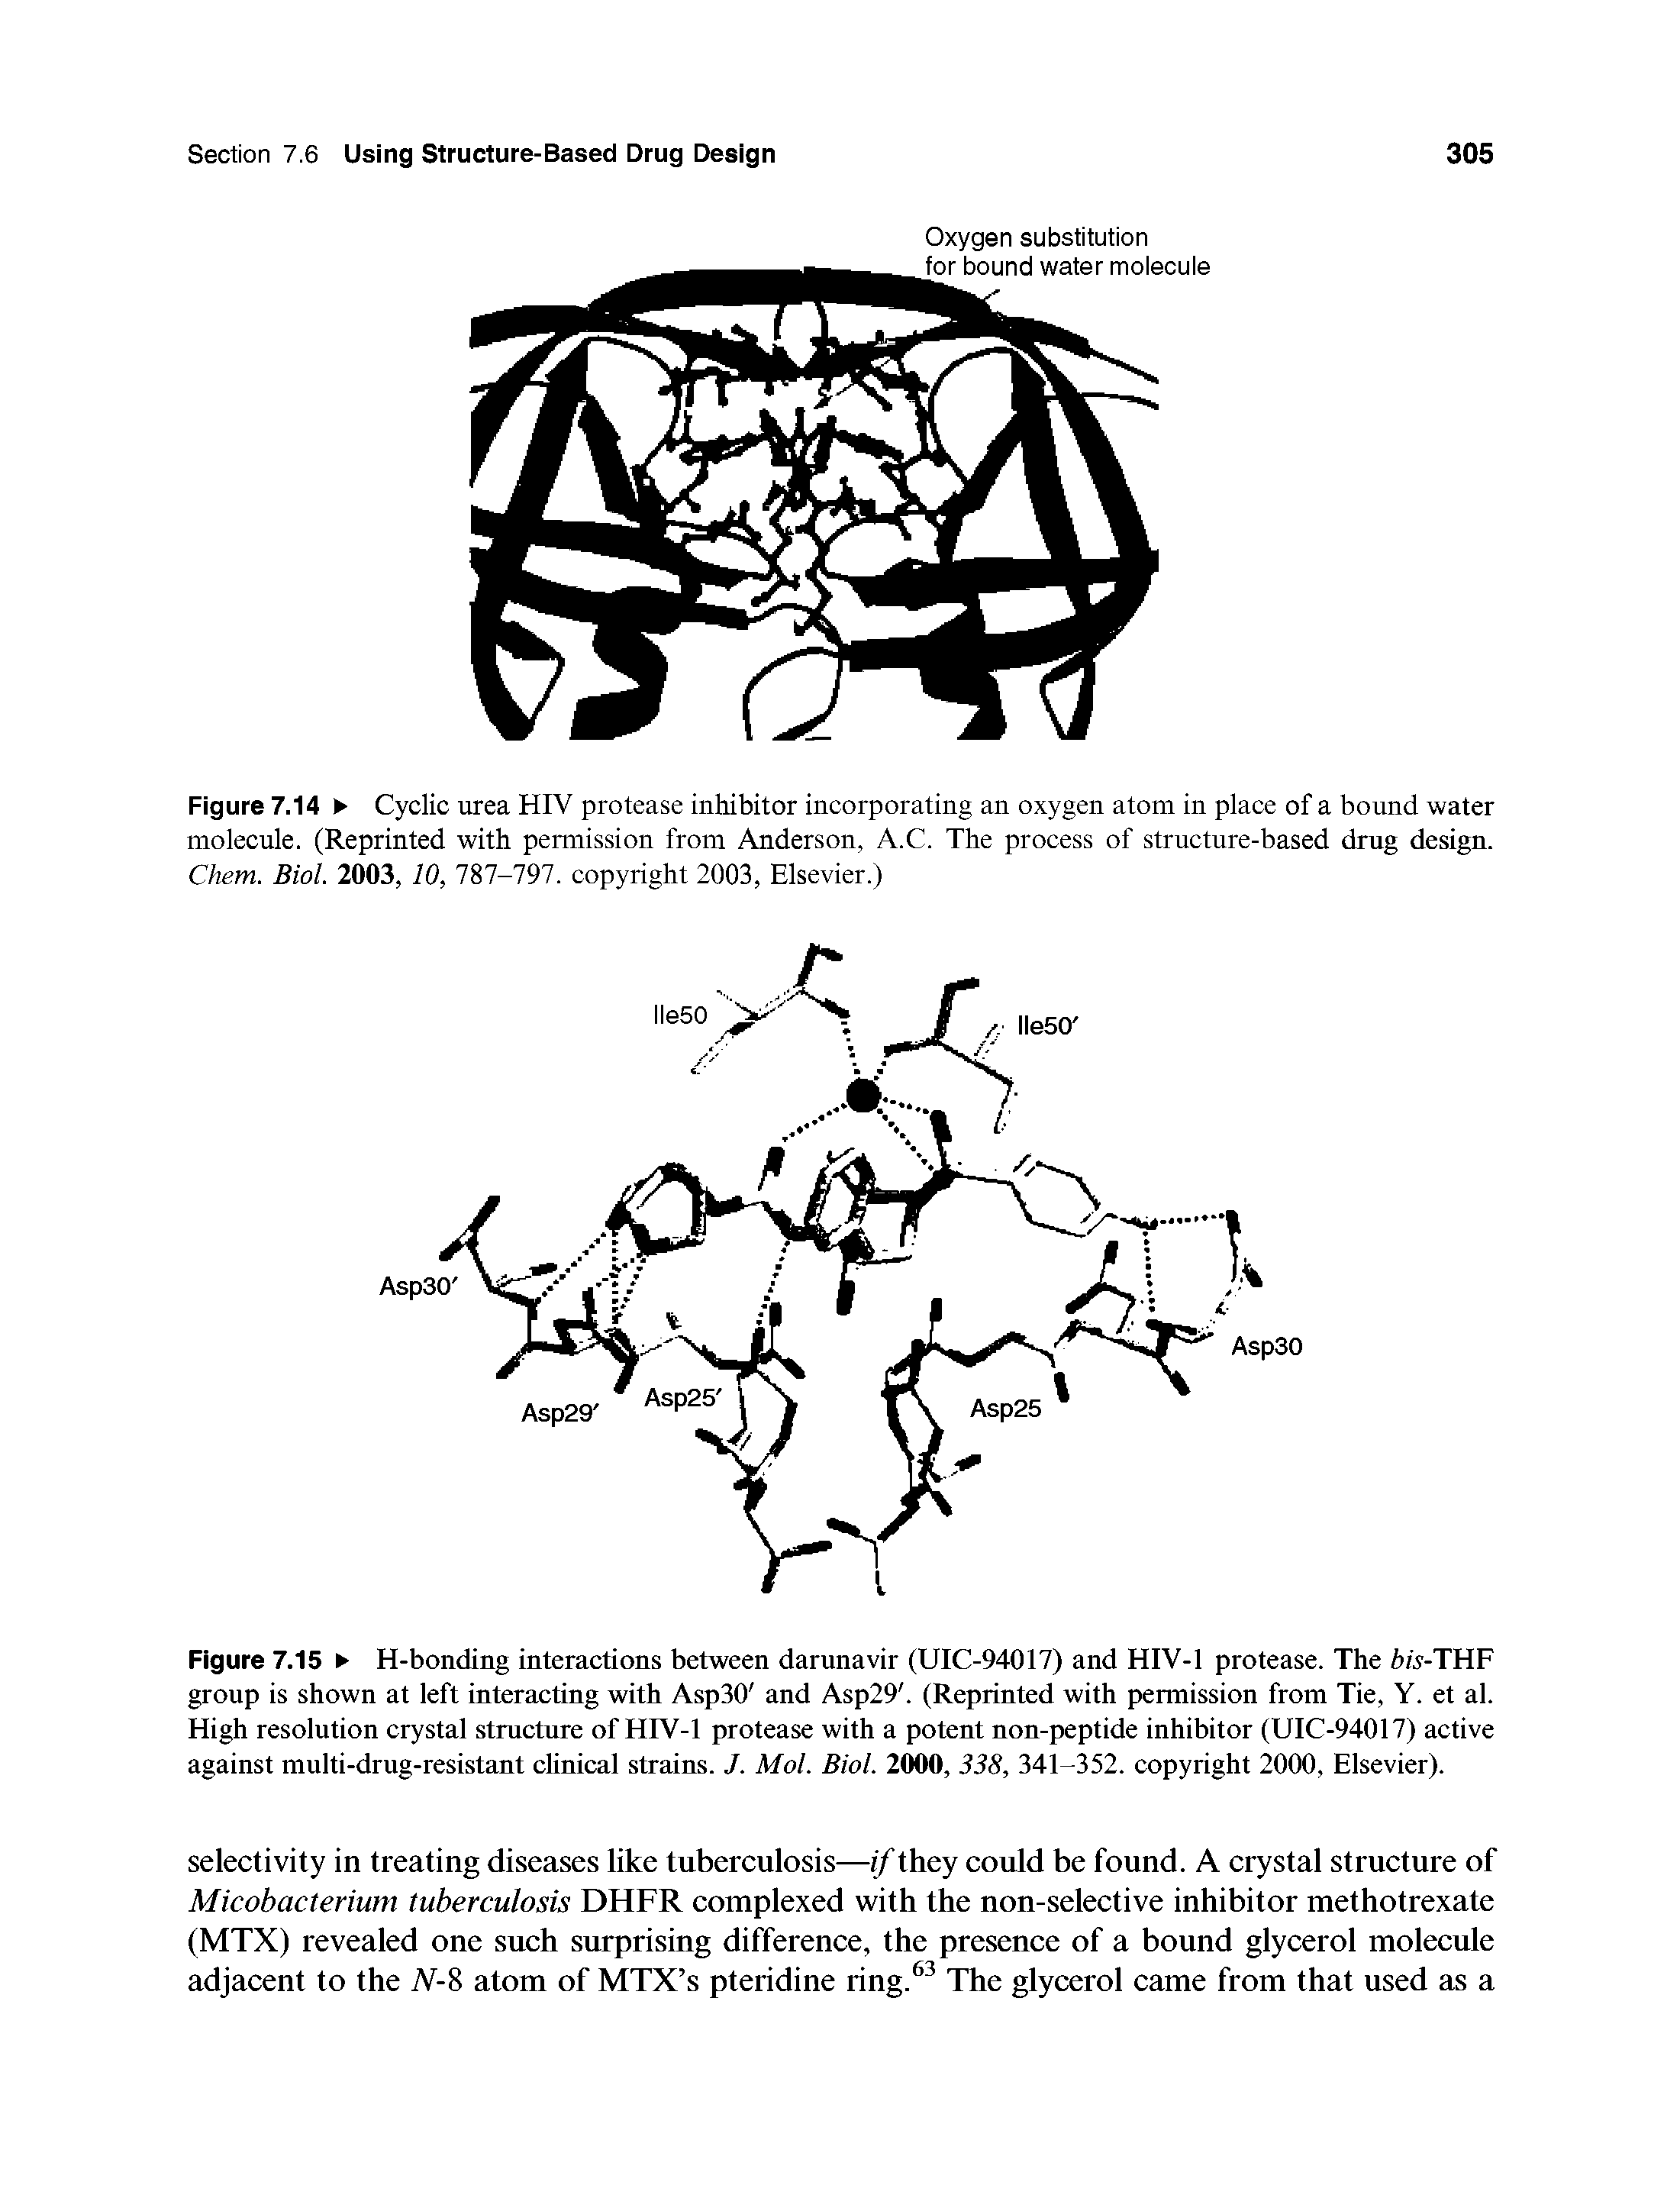 Figure 7.14 Cyclic urea HIV protease inhibitor incorporating an oxygen atom in place of a bound water molecule. (Reprinted with permission from Anderson, A.C. The process of structure-based drug design. Chem. Biol. 2003, 10, 19,1-191. copyright 2003, Elsevier.)...